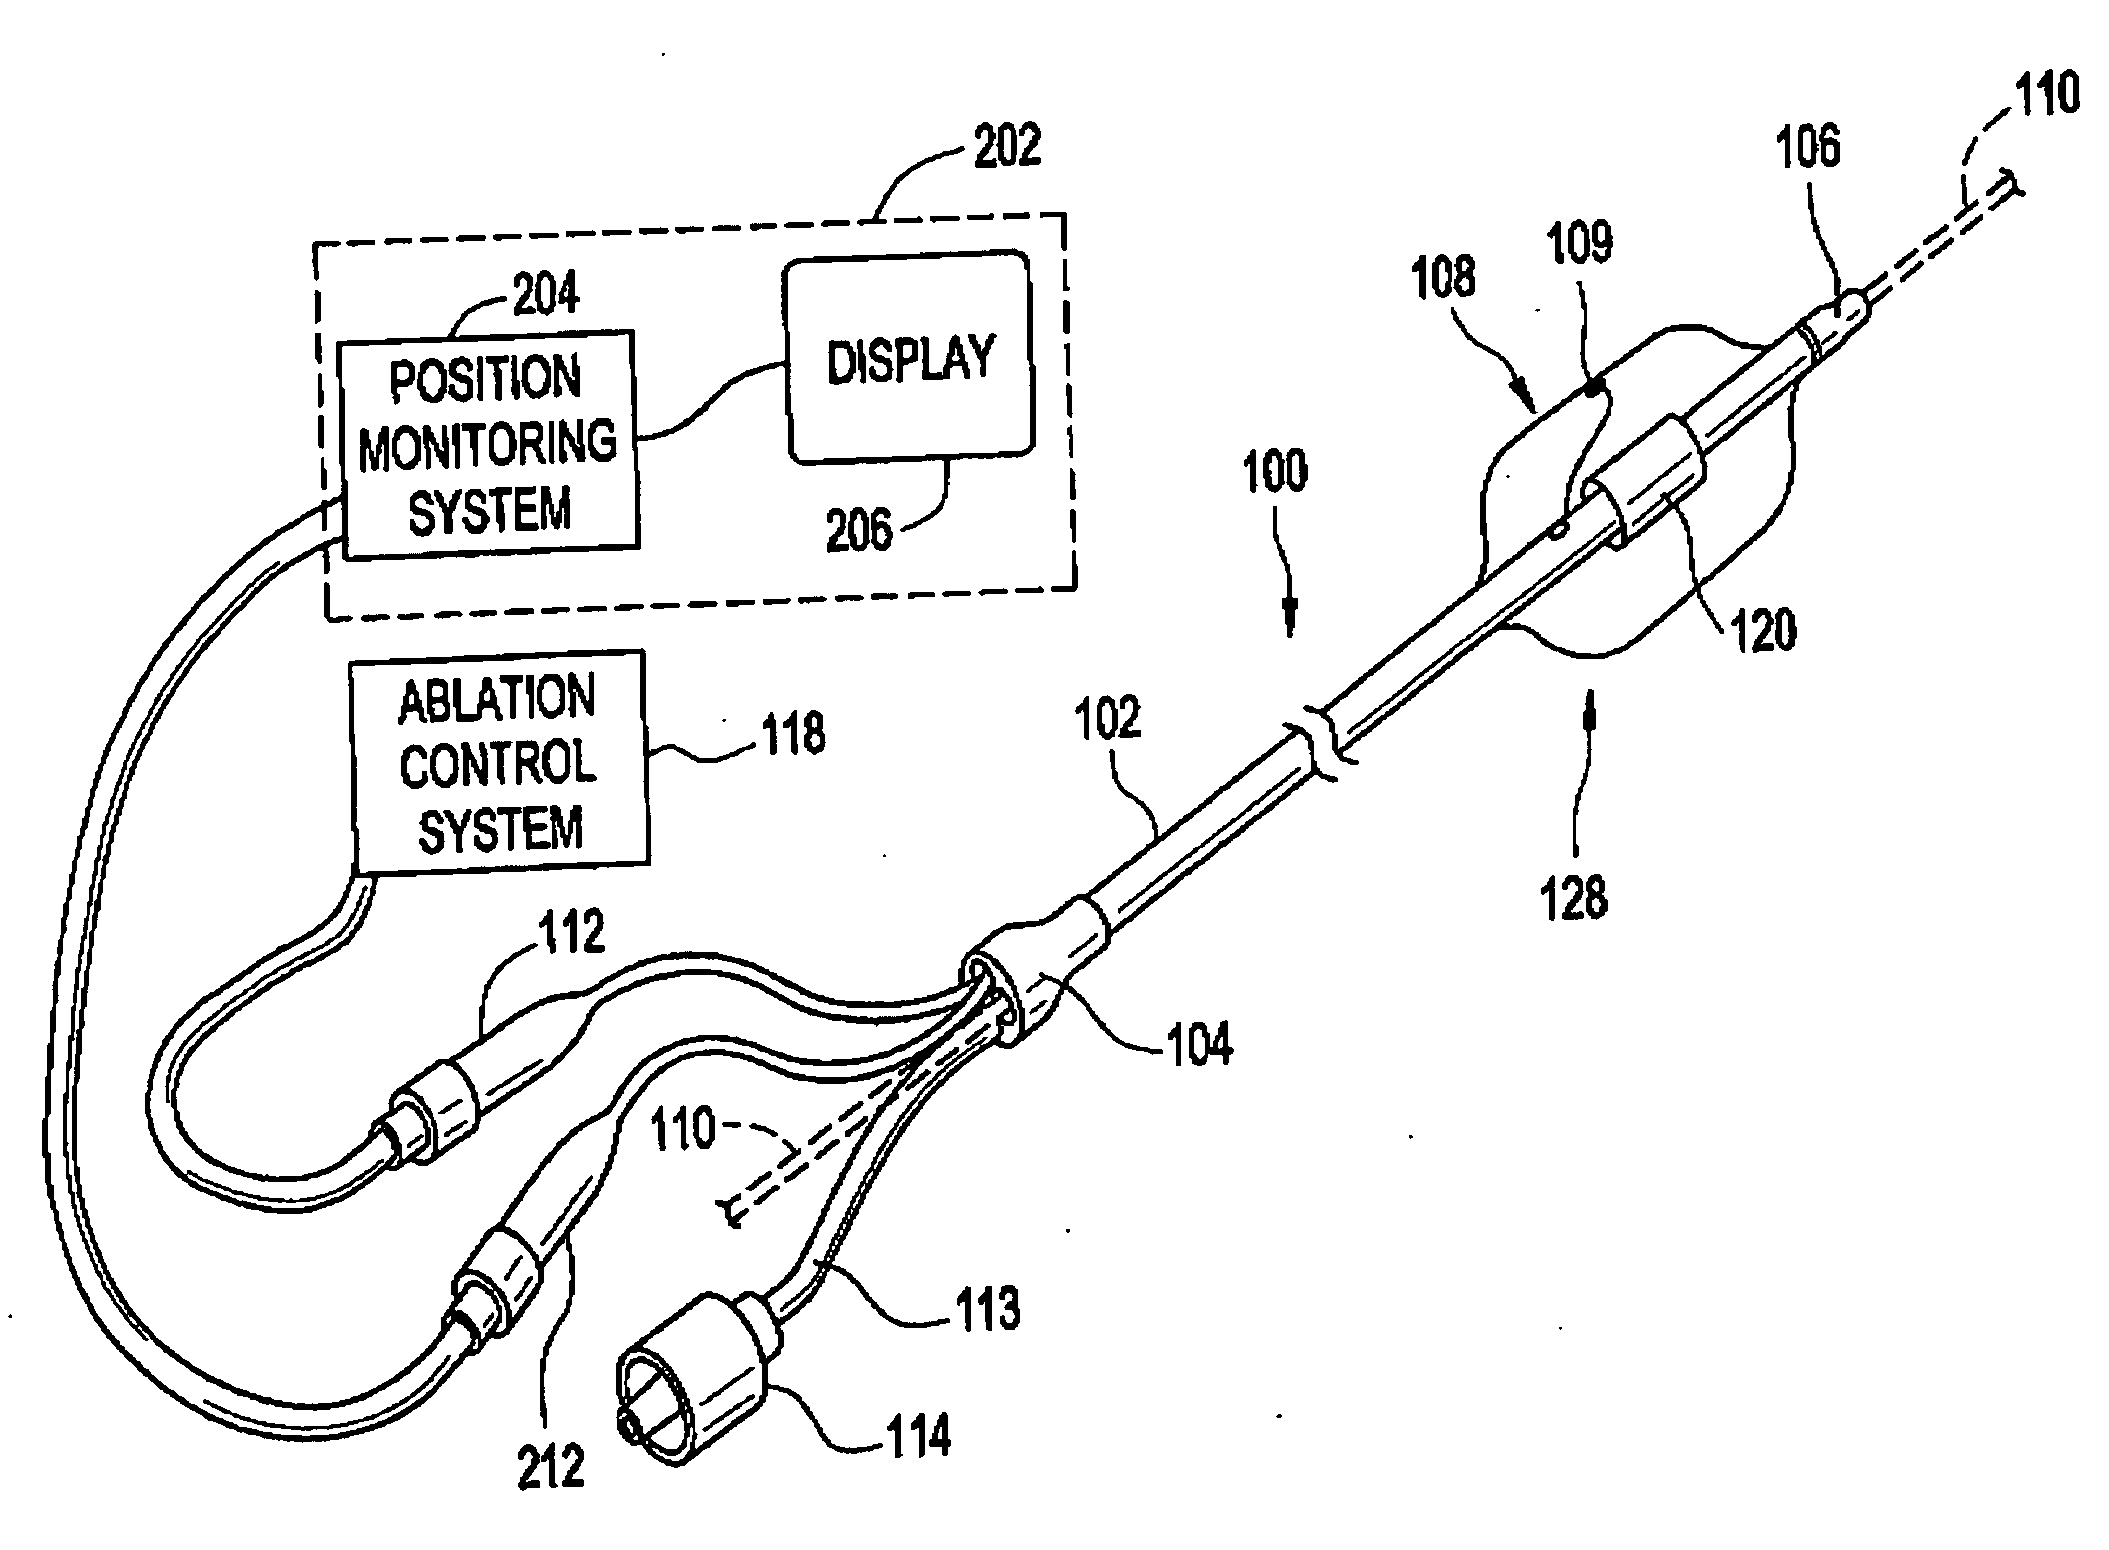 Ablation device with phased array ultrasound transducer